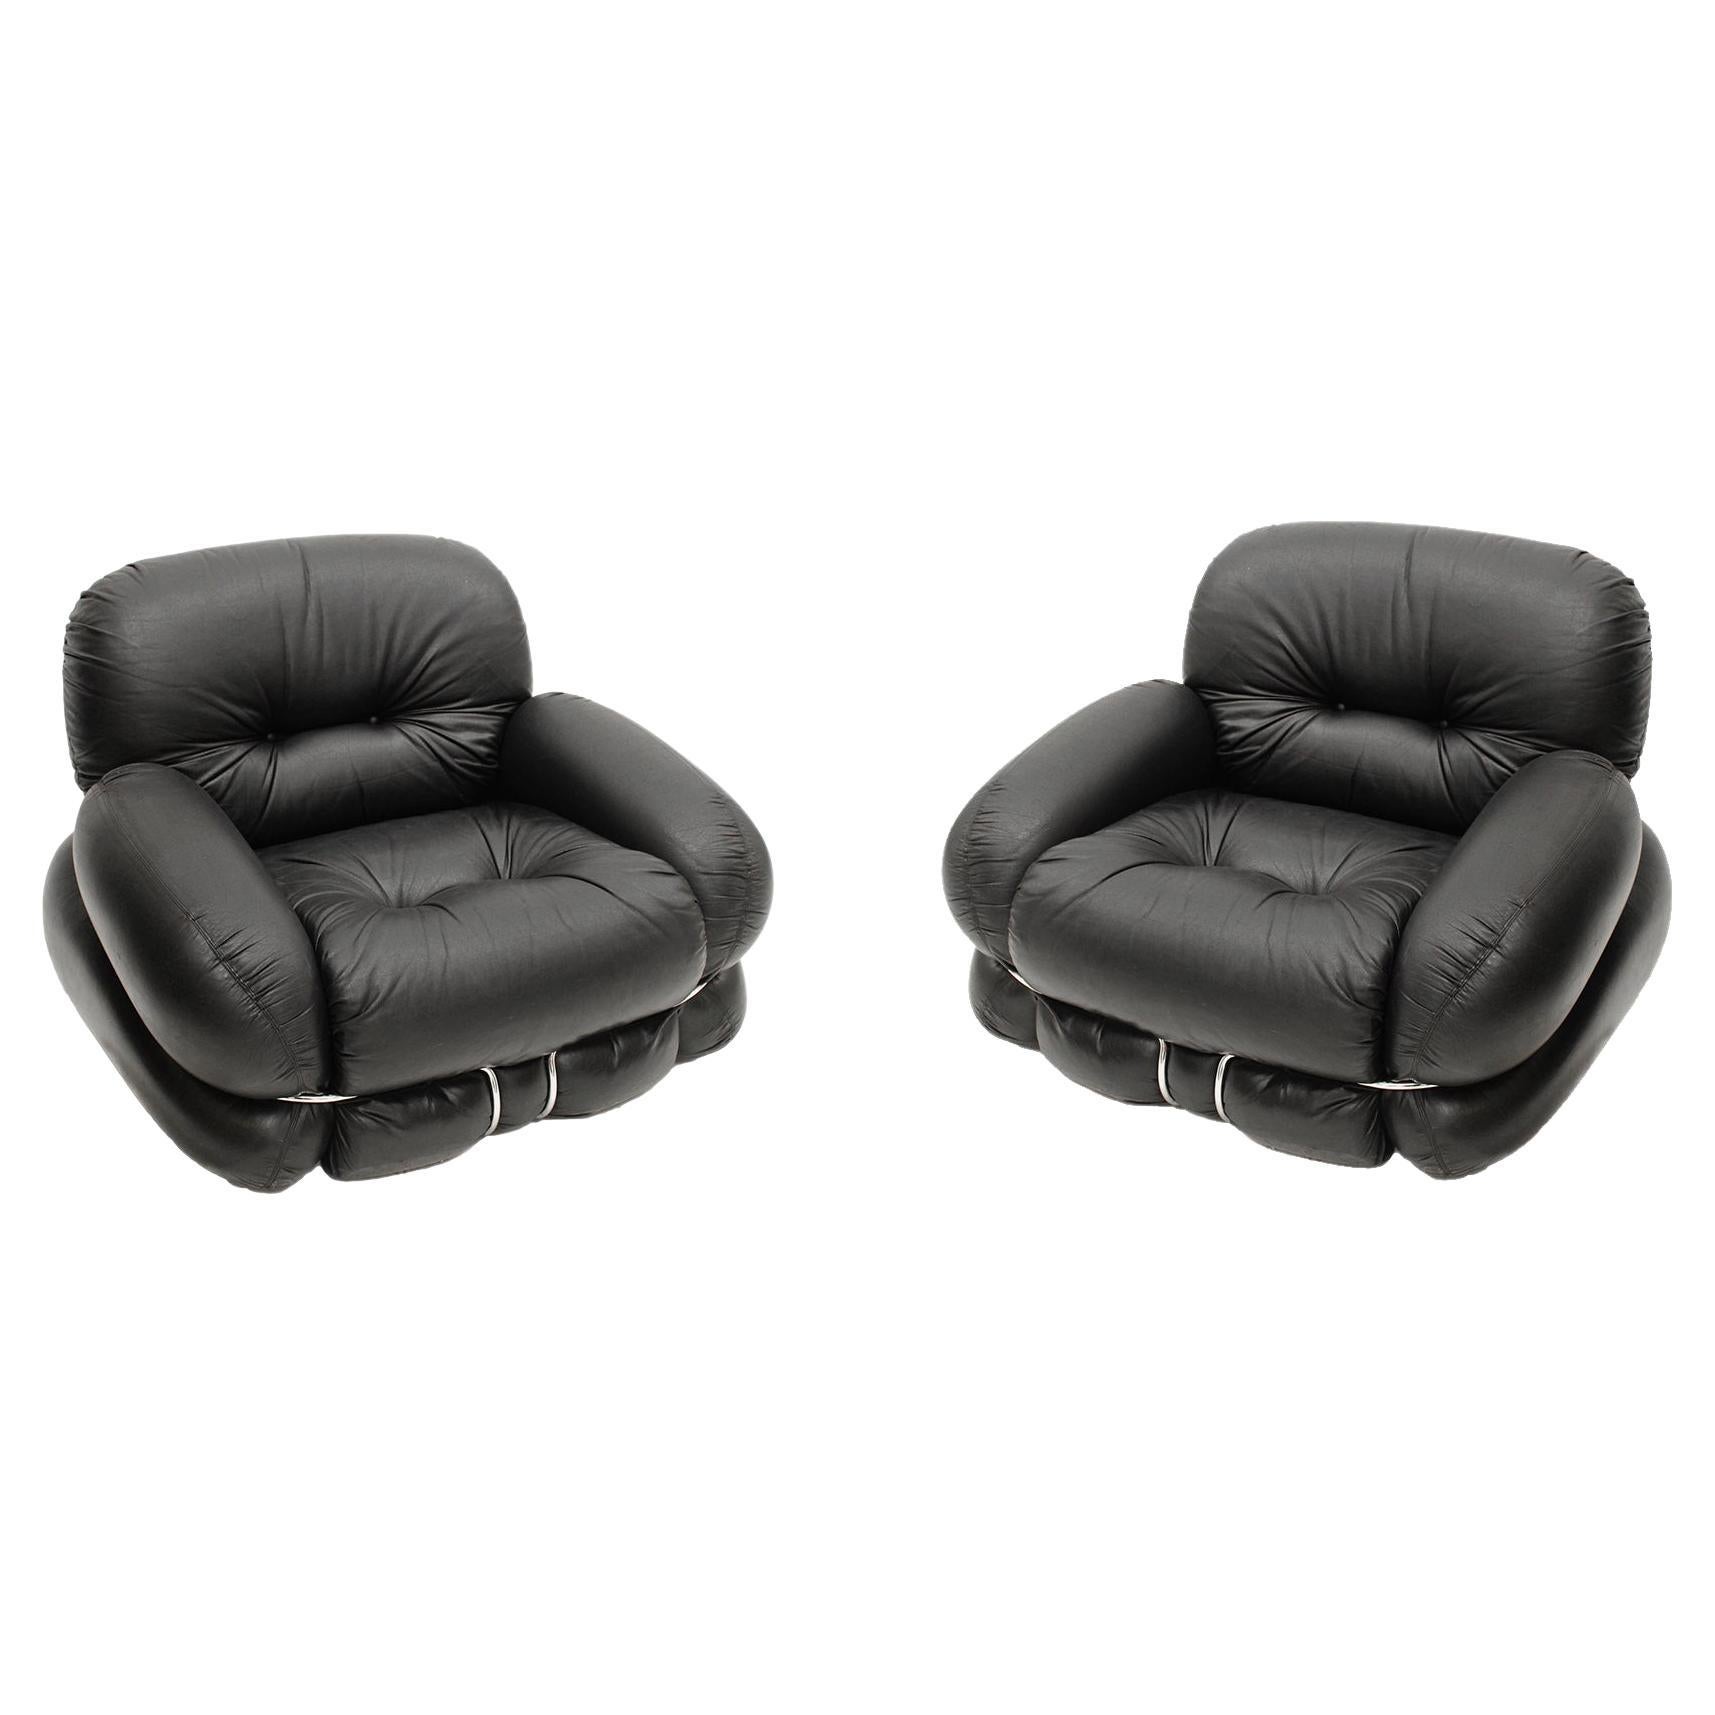 Italian Pair Of Okay Armchairs by Adriano Piazzesi with Black Leather and Steel 